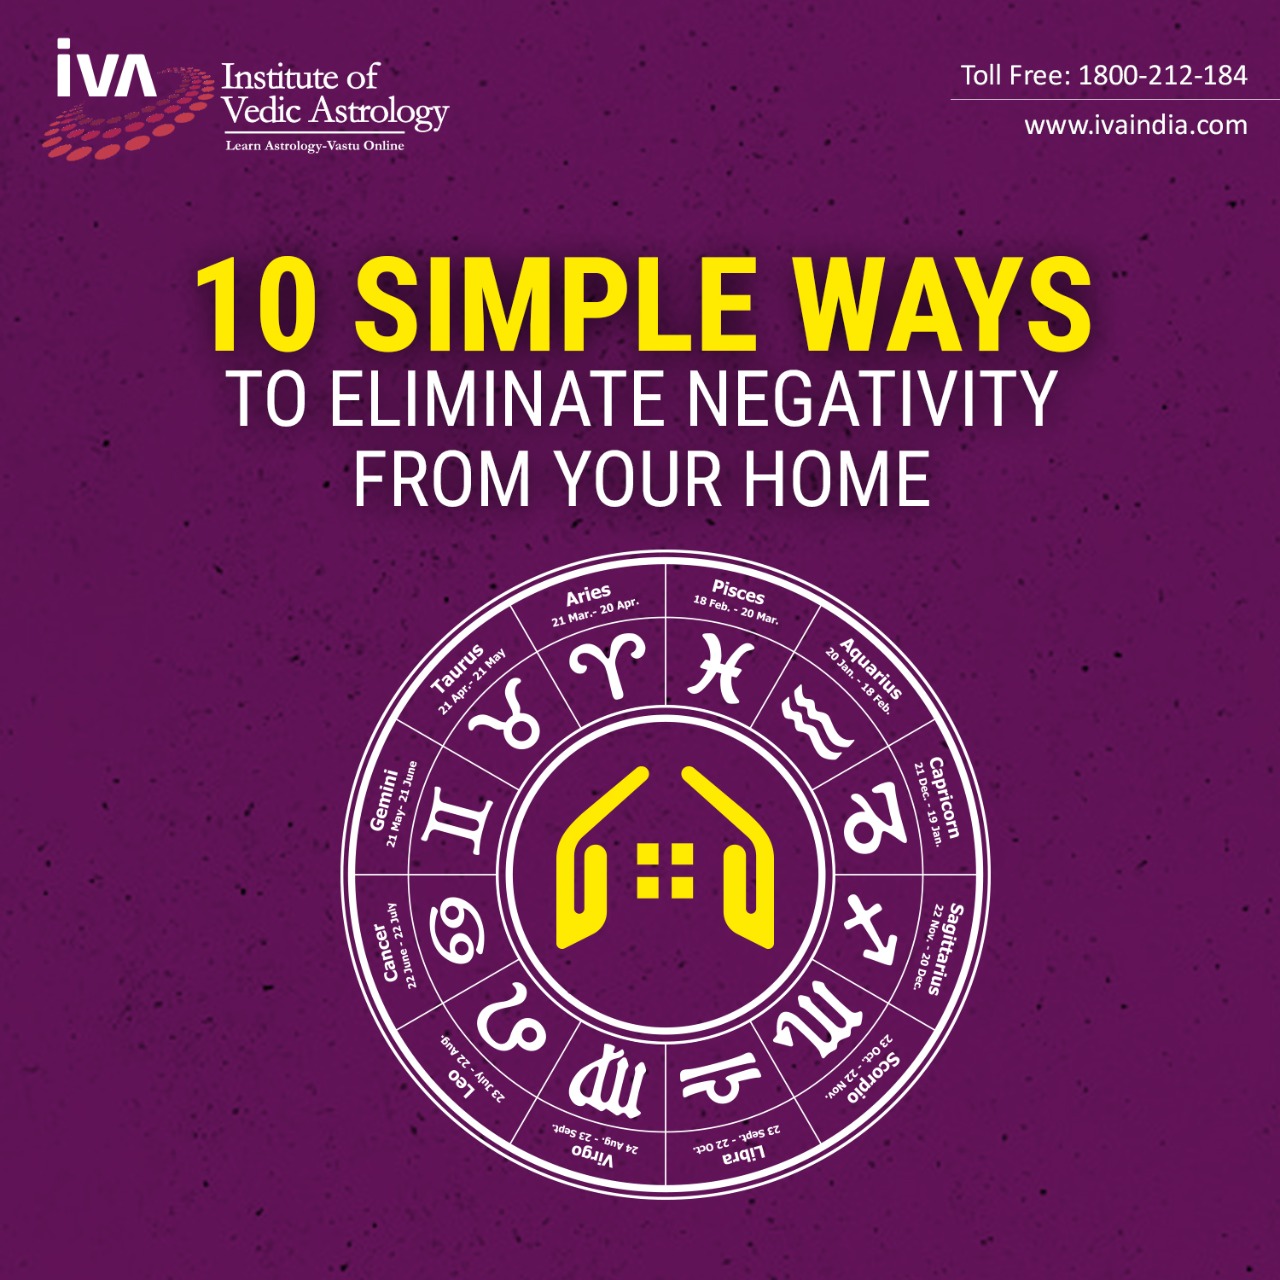 10 Simple Ways to Eliminate Negativity from your Home